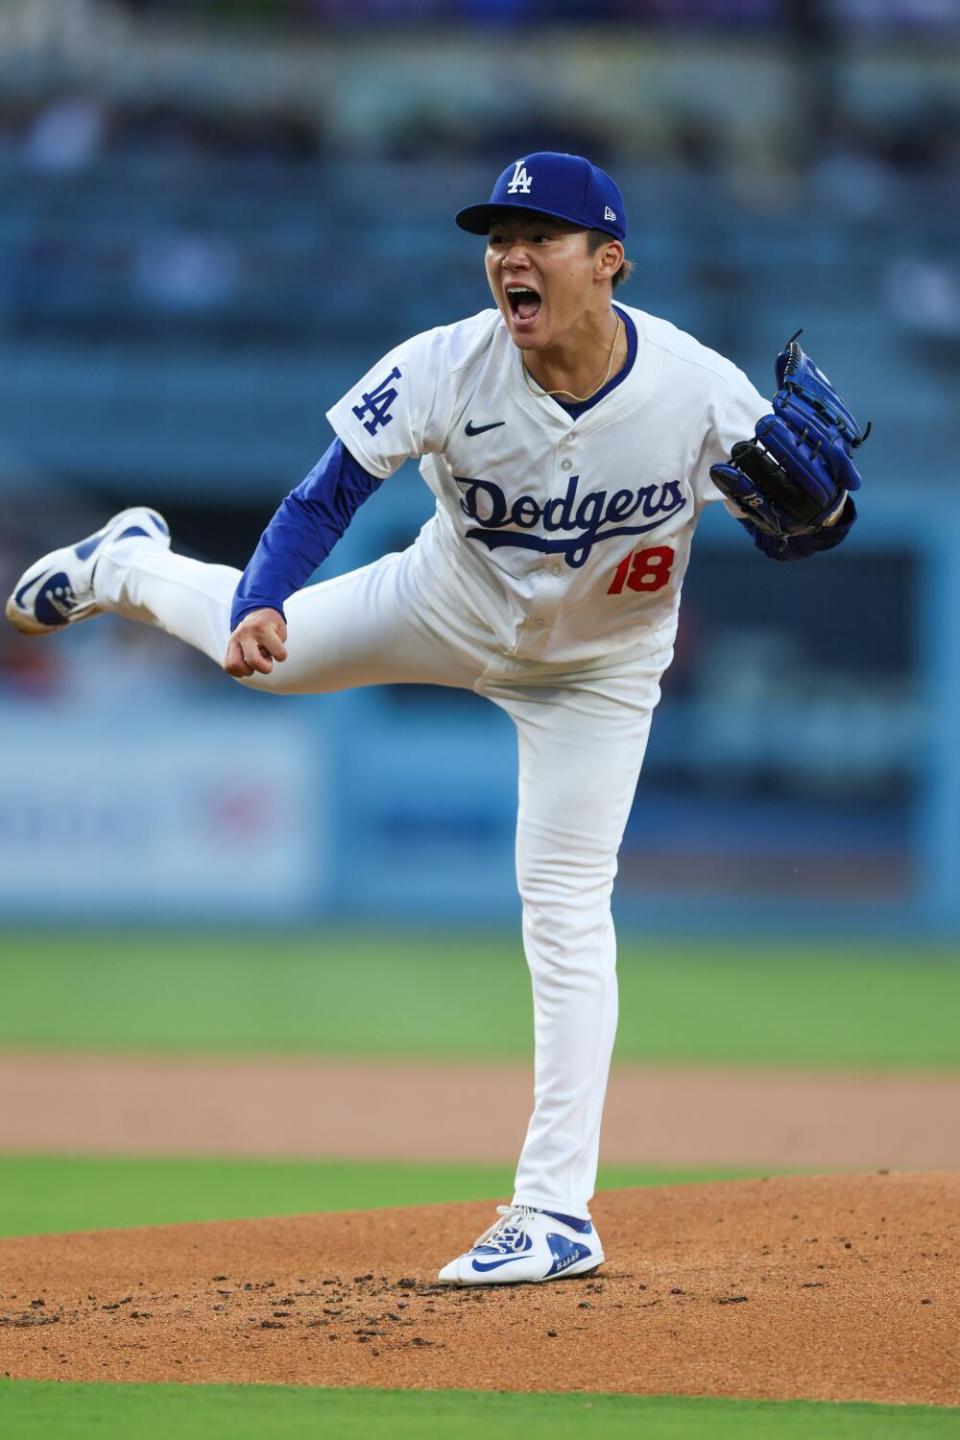 Dodgers starting pitcher Yoshinobu Yamamoto yells out as he throws a pitch in the first inning against the Colorado Rockies.